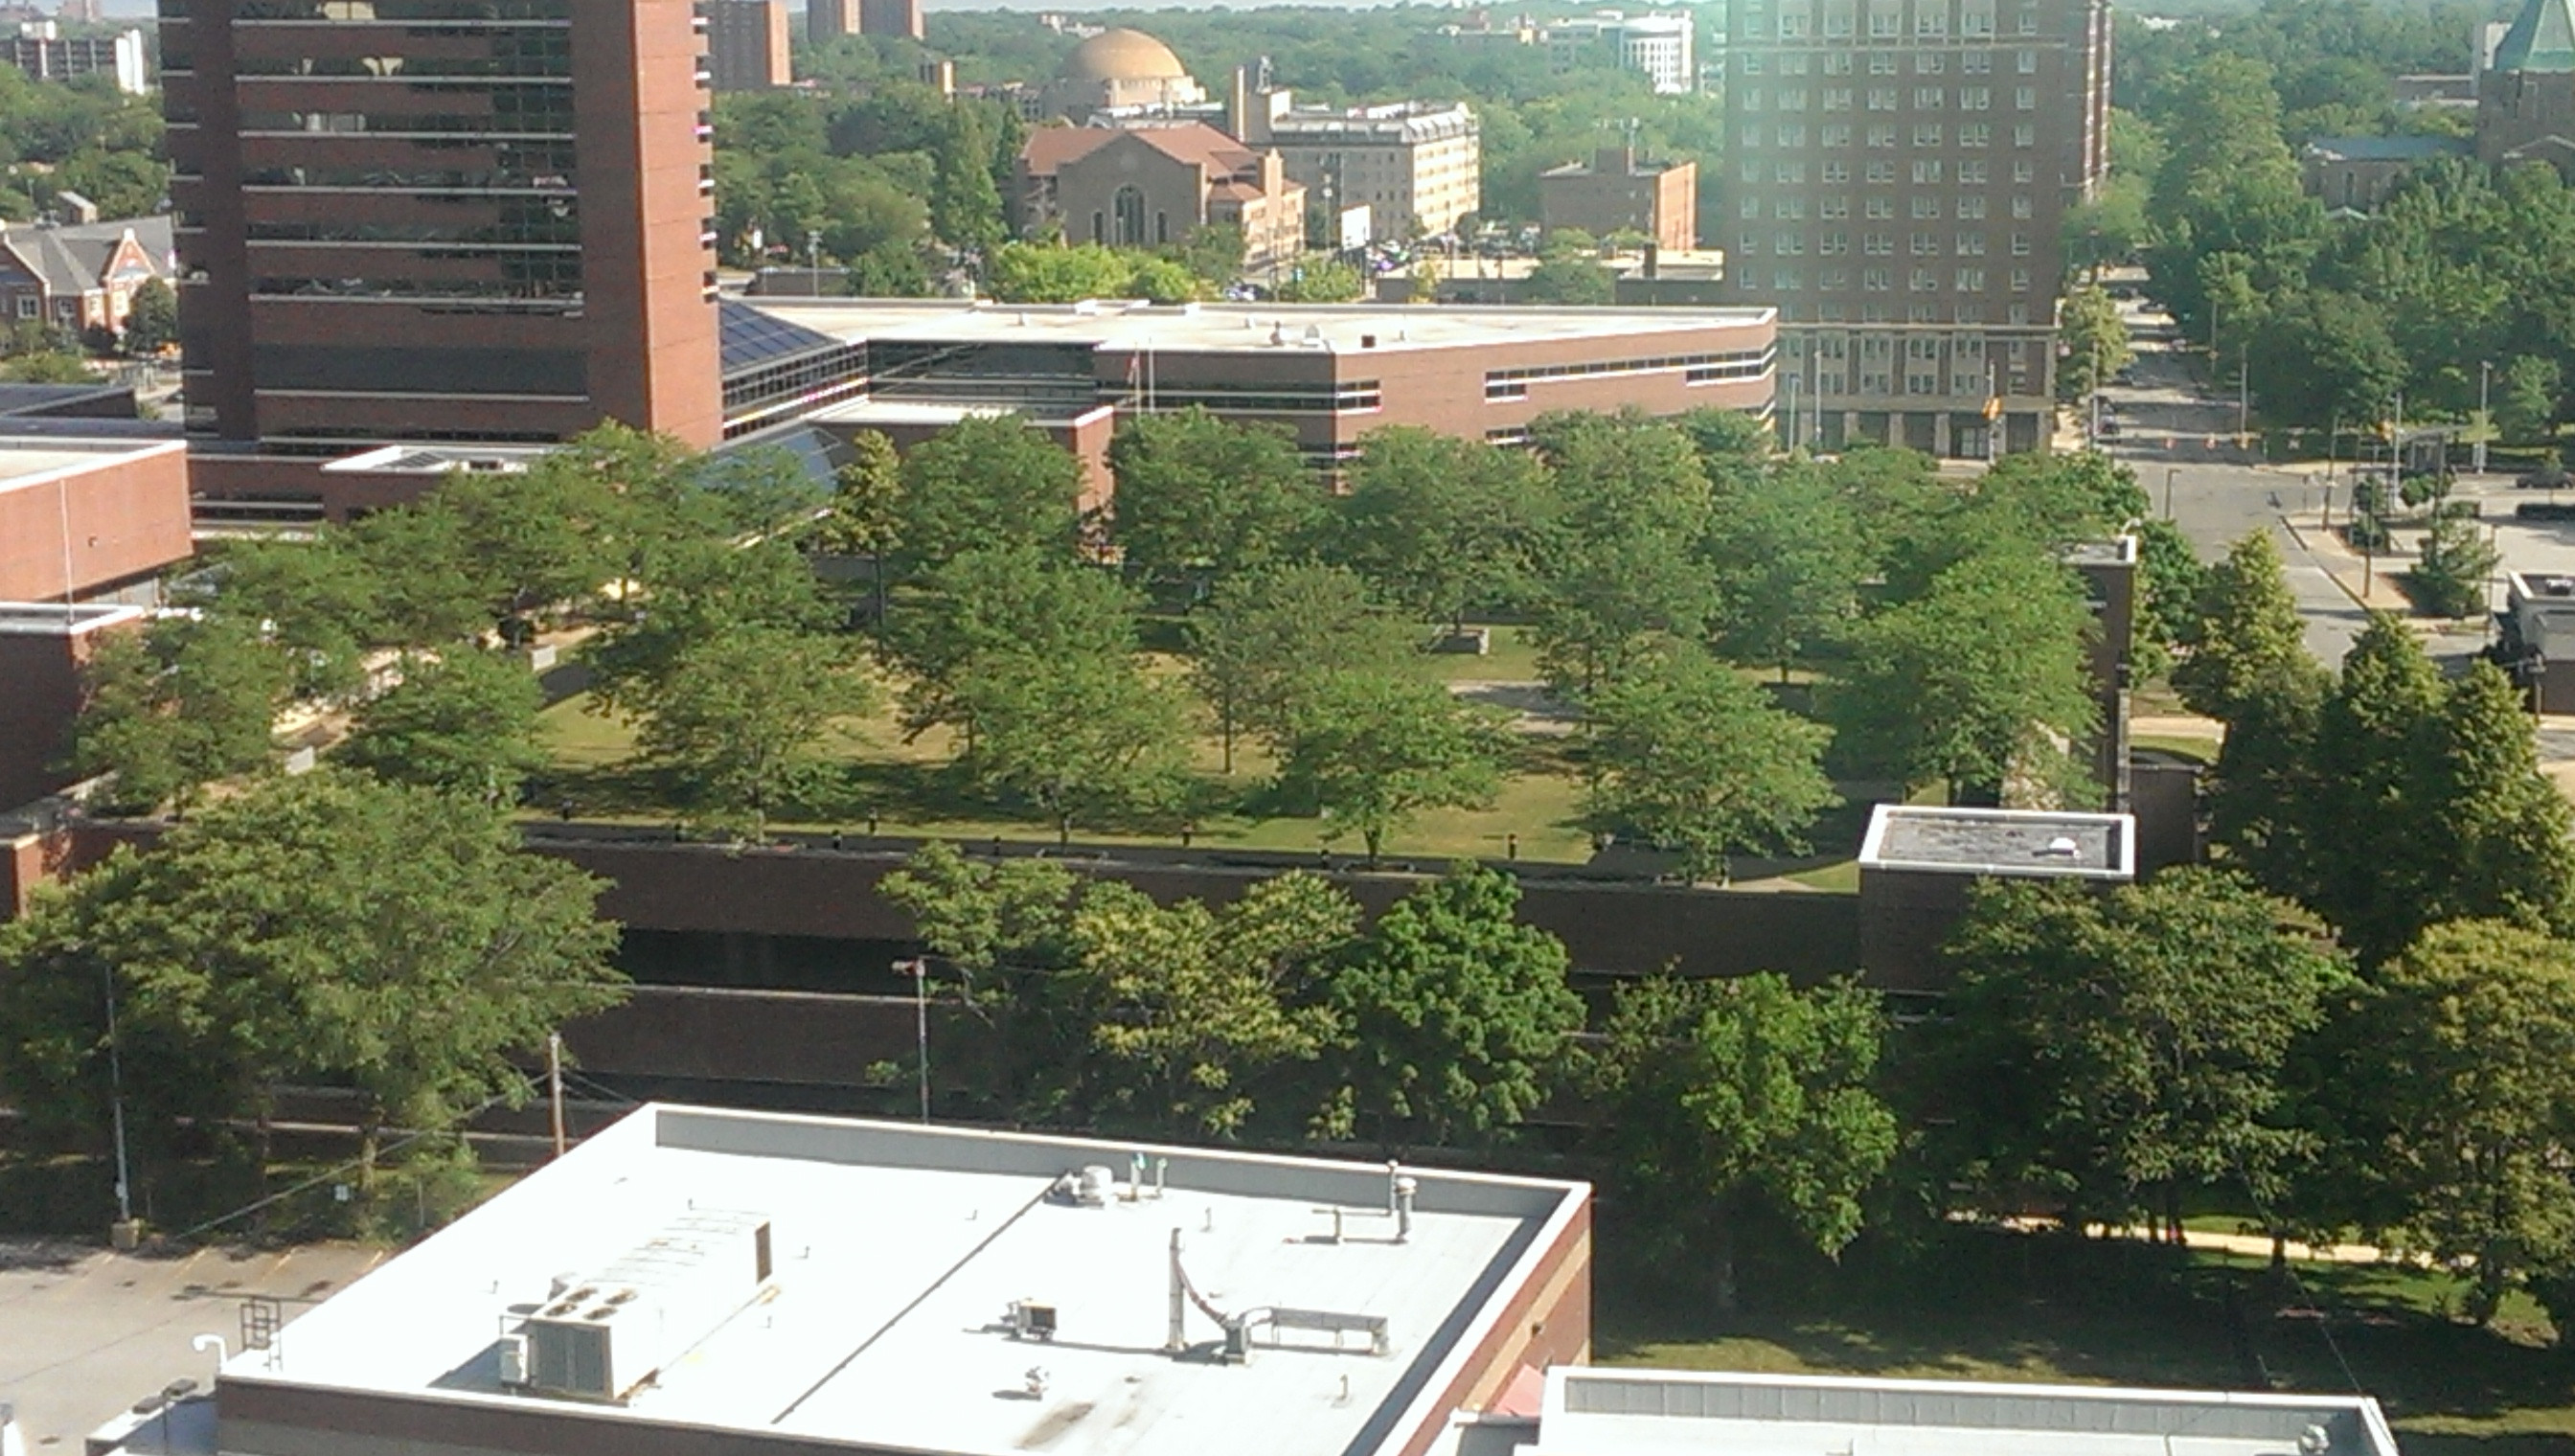 A building with a man made park on its roof with trees ...